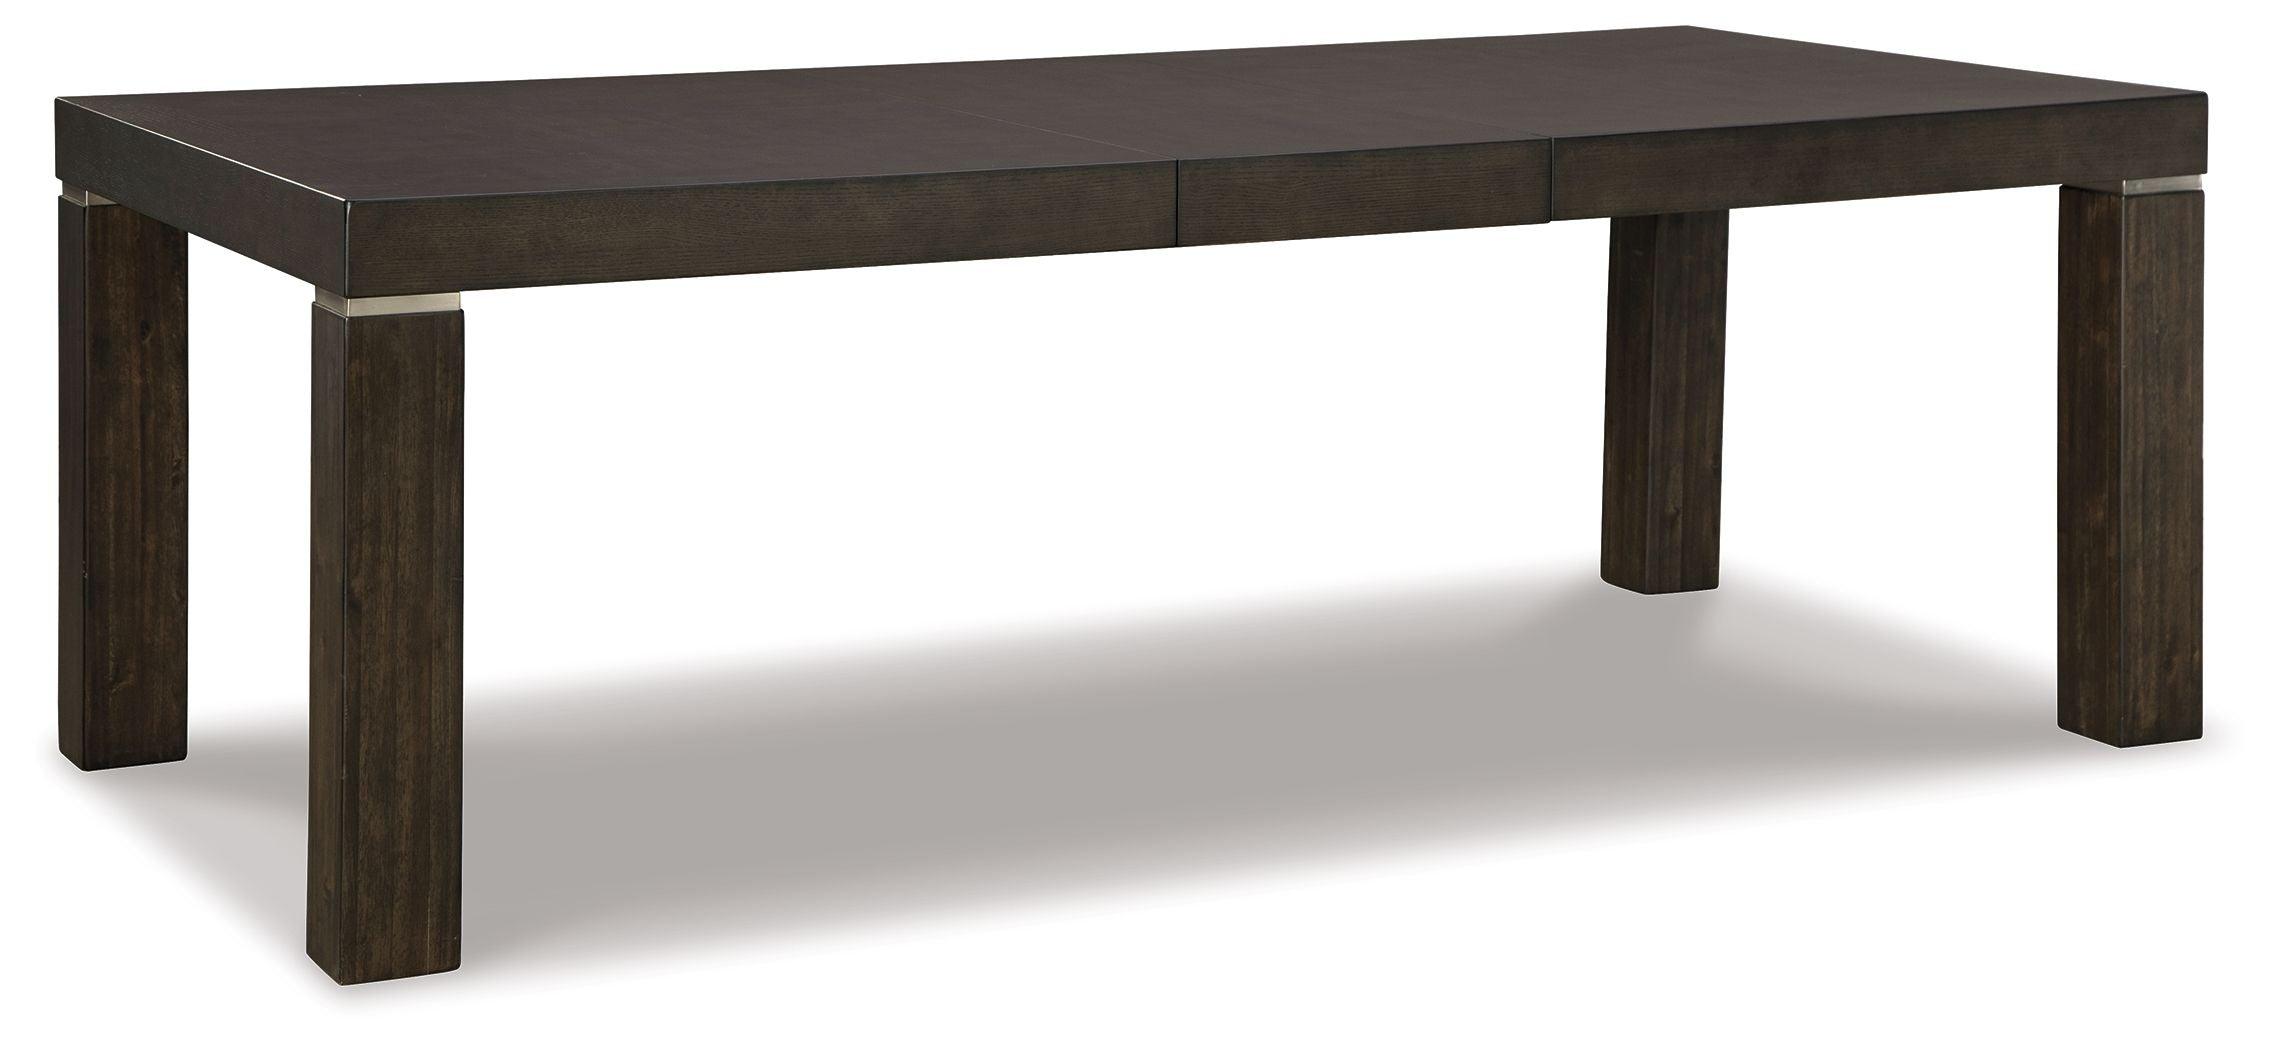 Signature Design by Ashley® - Hyndell - Dark Brown - Rectangular Dining Room Extension Table - 5th Avenue Furniture